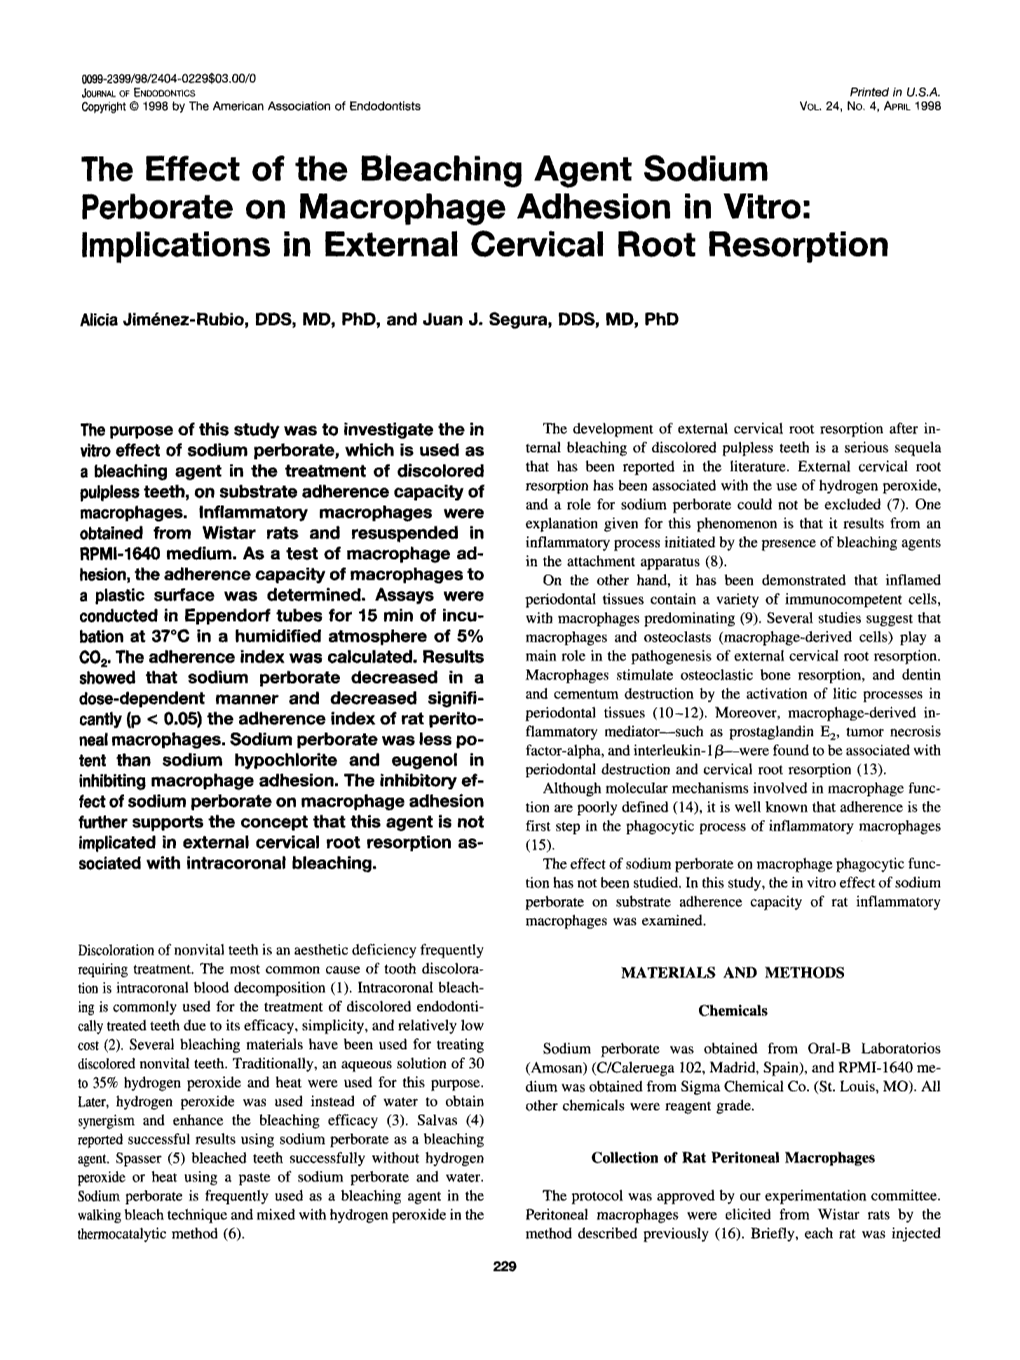 The Effect of the Bleaching Agent Sodium Perborate on Macrophage Adhesion in Vitro: Implications in External Cervical Root Resorption